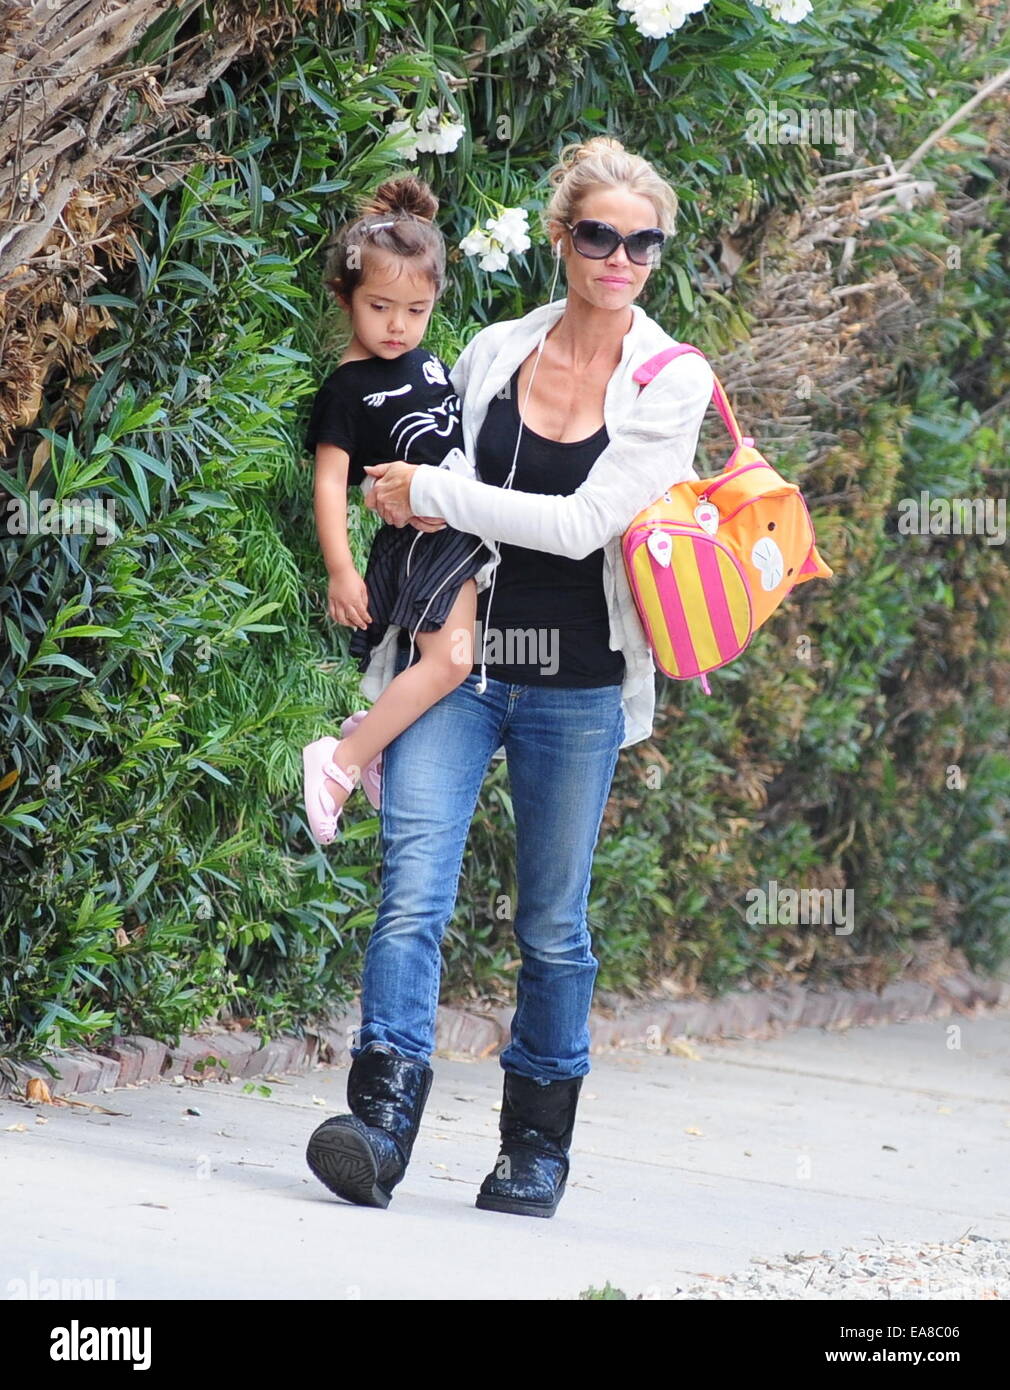 Denise Richards walking in Ugg boots and jeans carries her daughter Eloise  in her arms while out and about in West Hollywood Featuring: Denise  Richards,Eloise Sheen Where: Los Angeles, California, United States